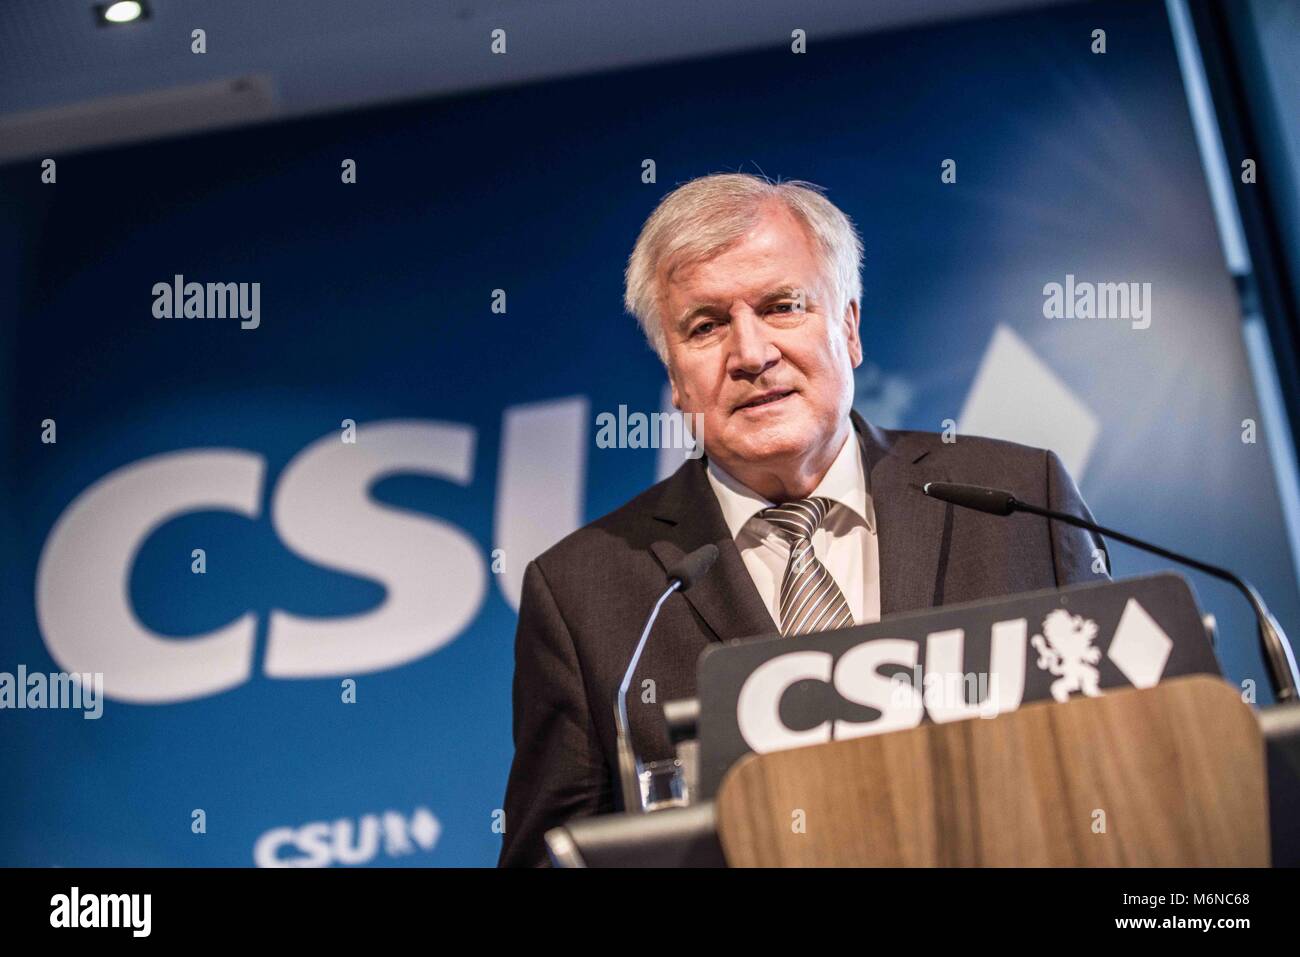 Munich, Bavaria, Germany. 5th Mar, 2018. The future German Heimatminister (Homeland) Horst Seehofer unveiled the CSU cabinet appointees at a press conference at the CSU offices in Munich. As of the ratification of the SPD entering the GroKo Grand Coalition, Seehofer has confirmed the acceptance of the cabinet position. Credit: ZUMA Press, Inc./Alamy Live News Stock Photo